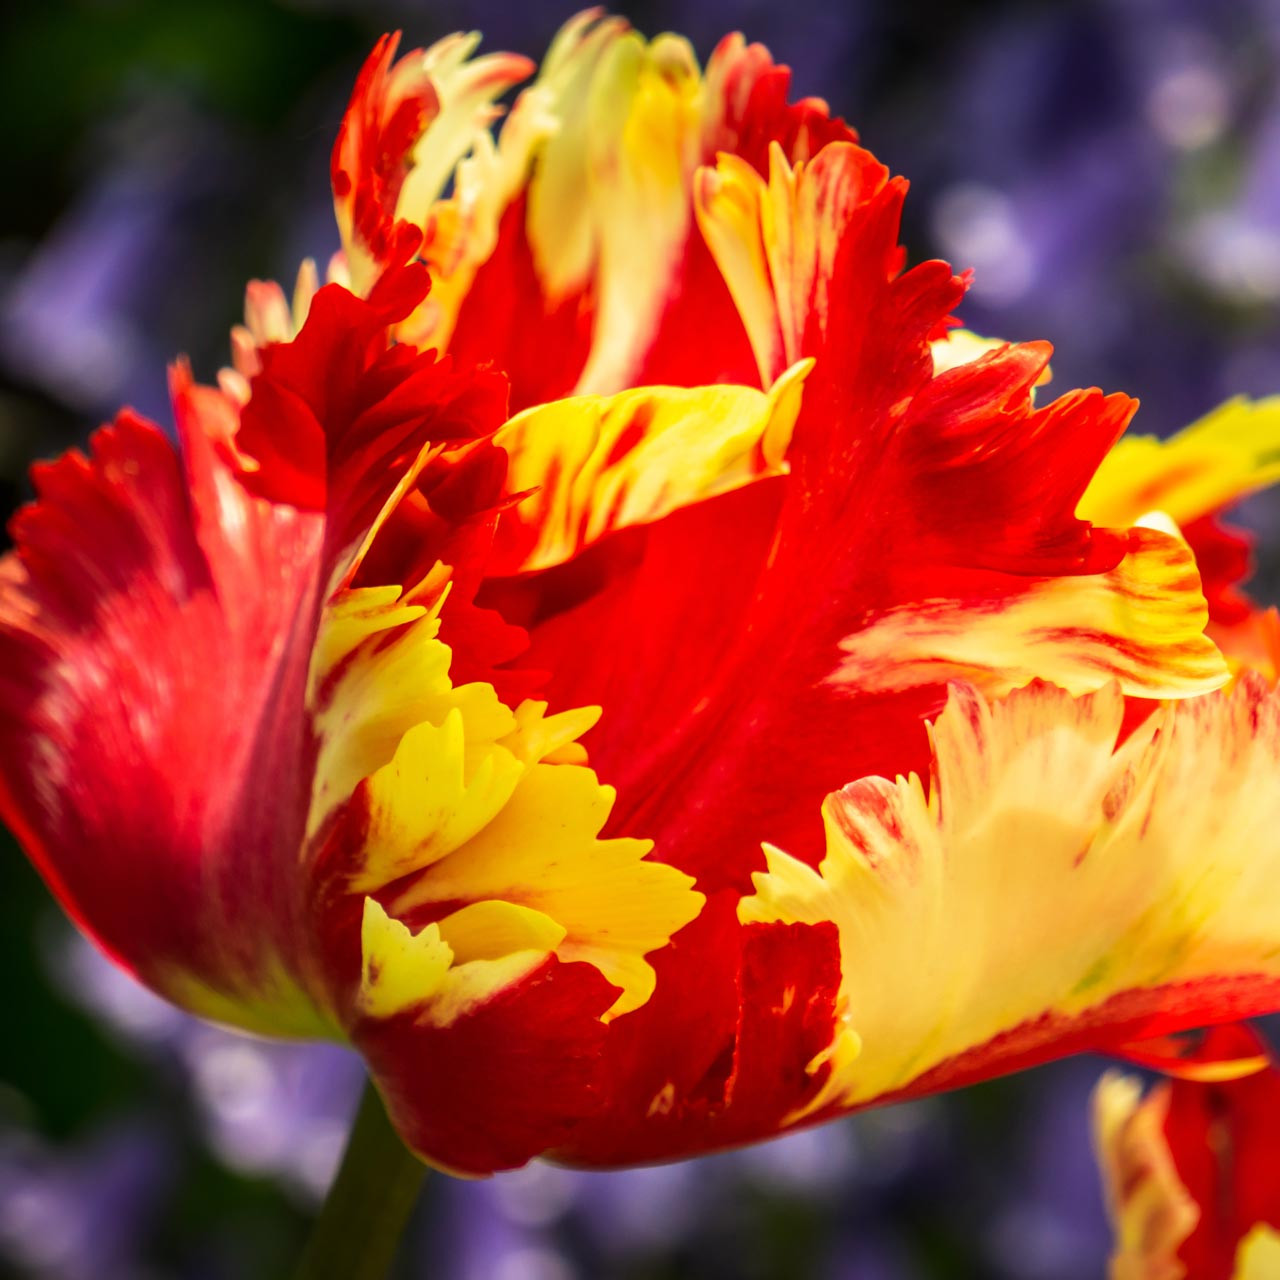 Flaming Parrot Tulip (Tulipa) - October Delivery - Annie's Heirloom Seeds